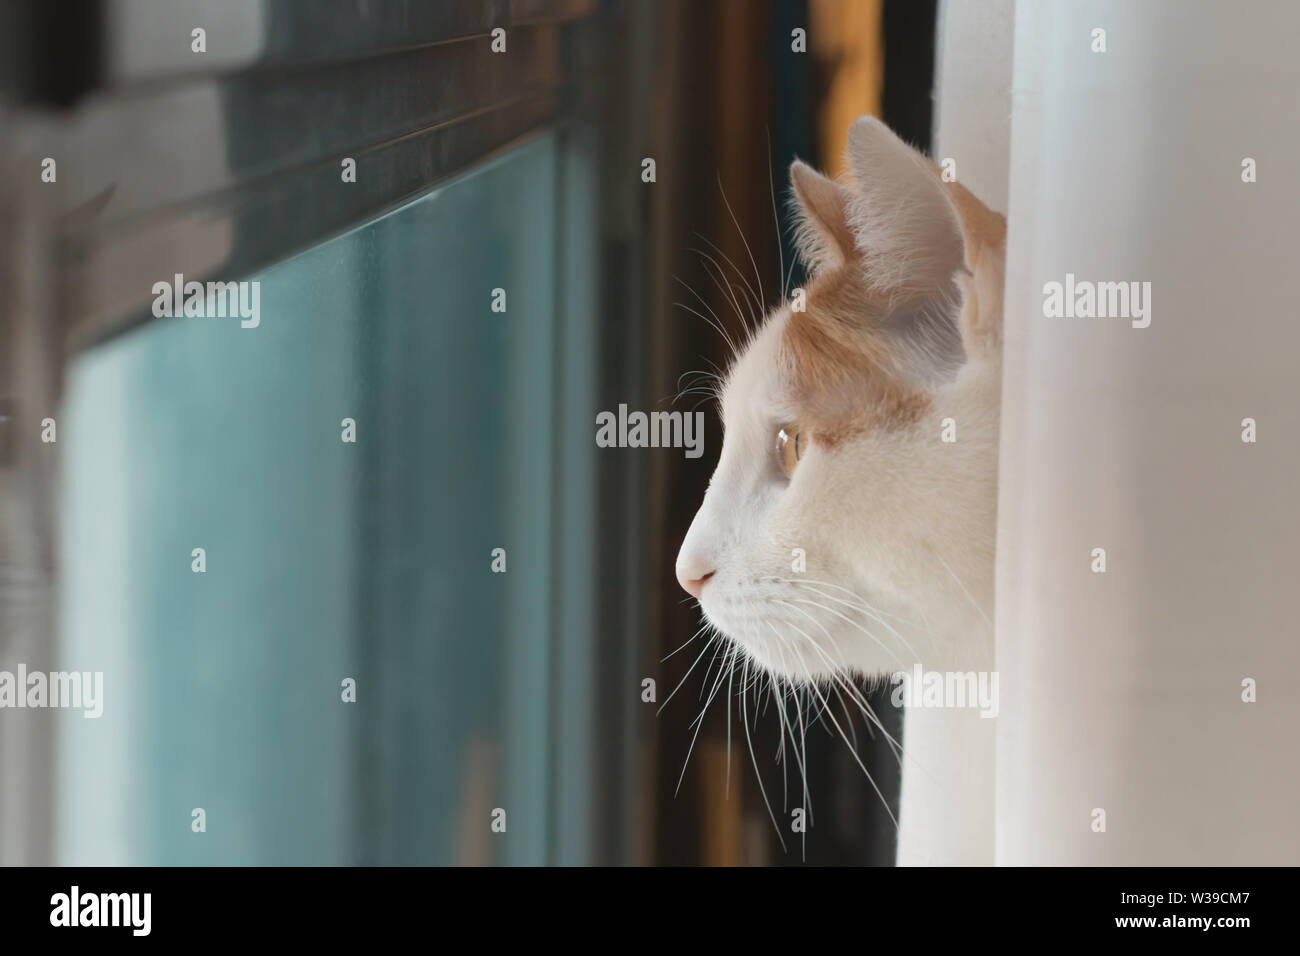 White cat with brown spots looking out the window behind a curtain Stock Photo